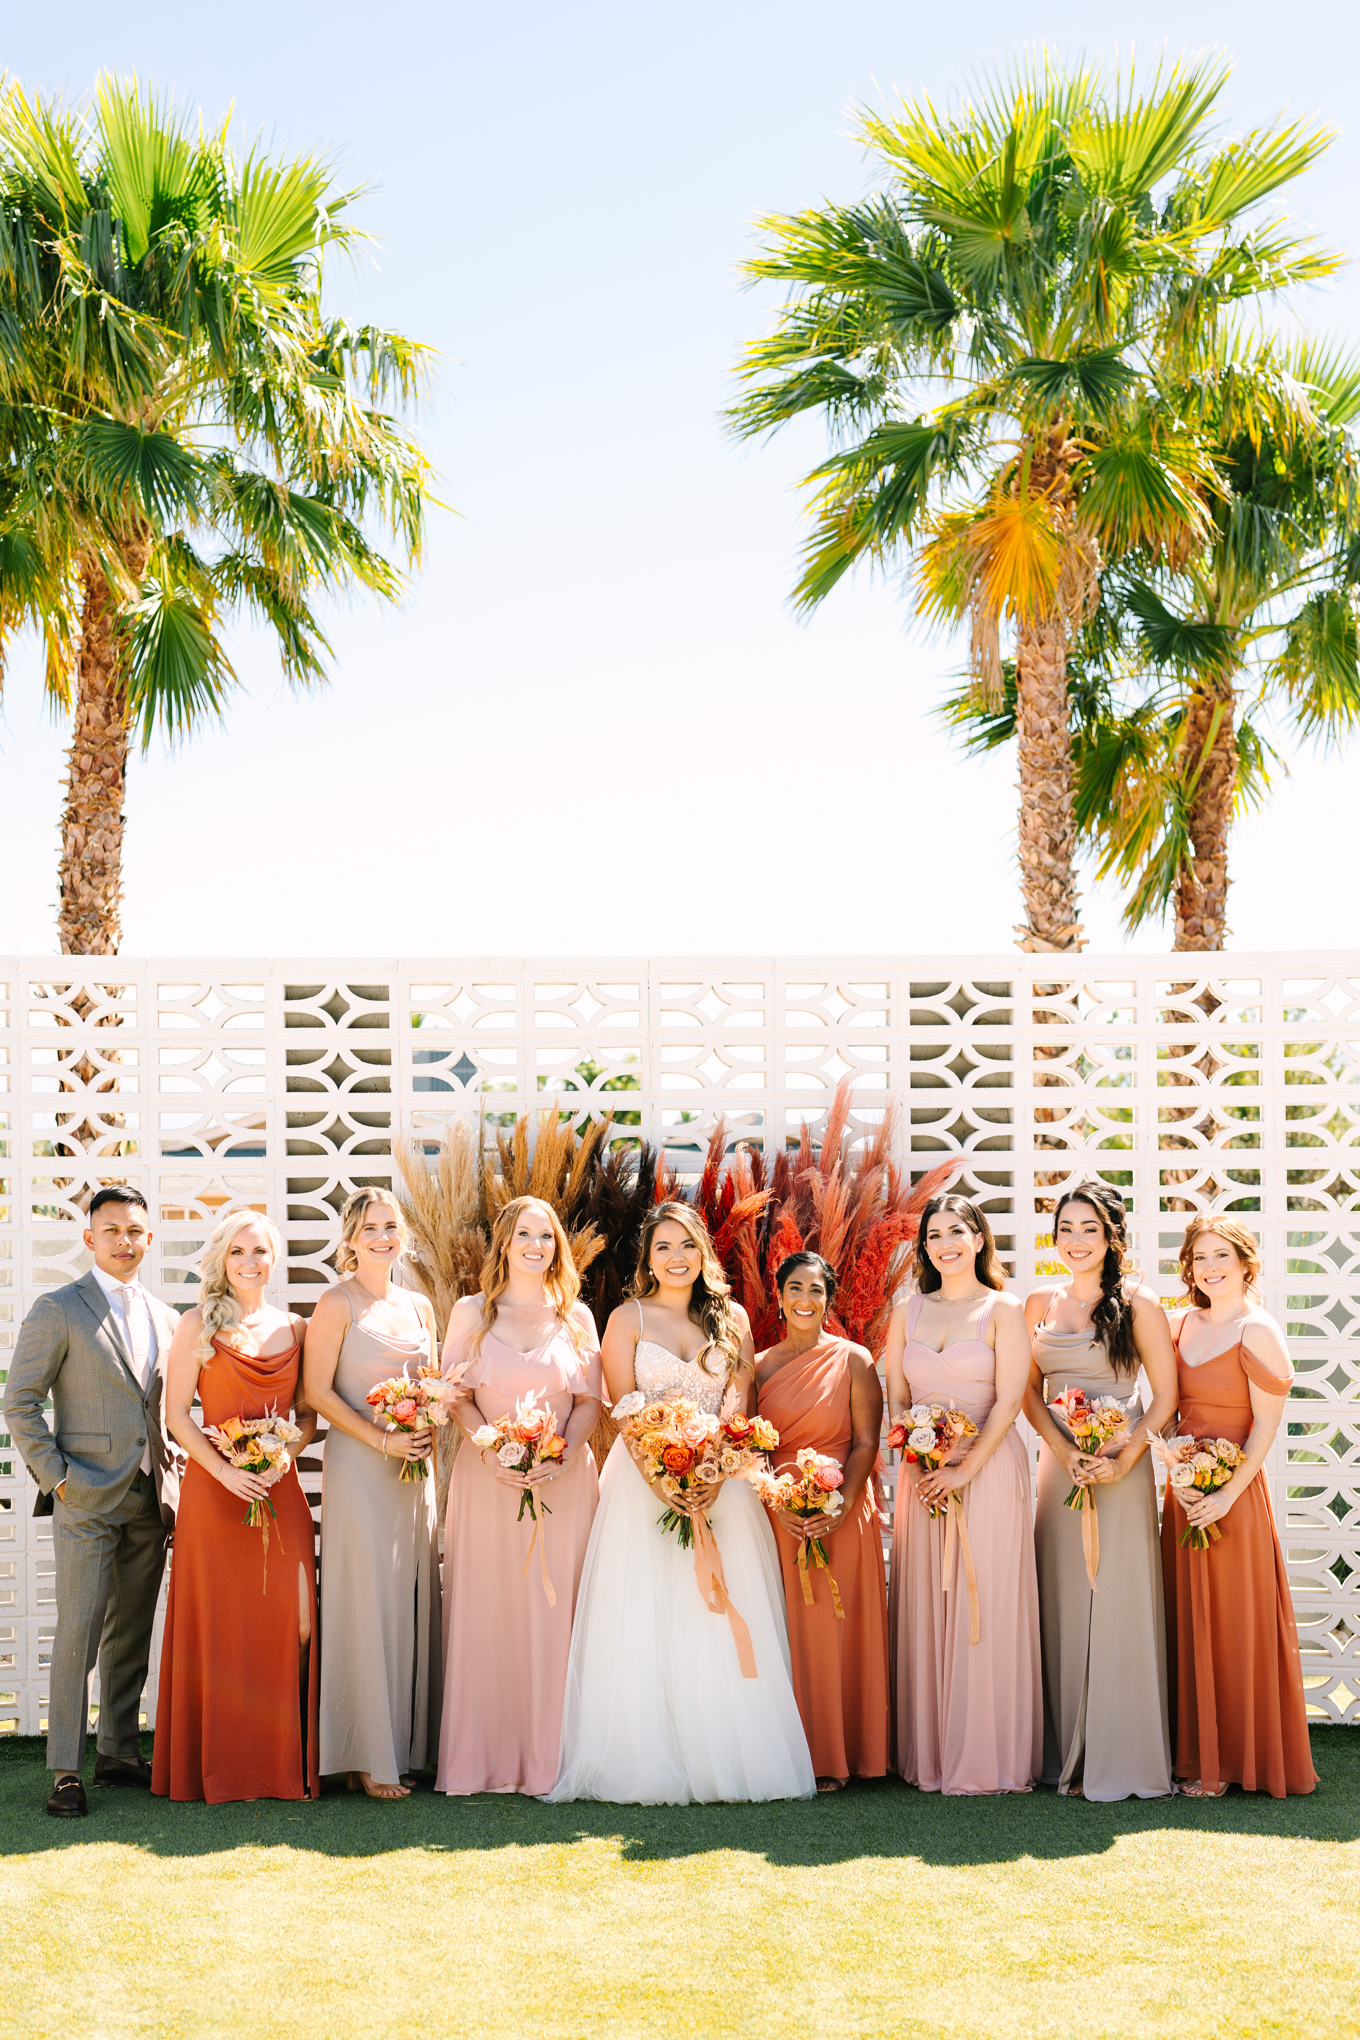 Bridal party on breeze block wall | Pink and orange Lautner Compound wedding | Colorful Palm Springs wedding photography | #palmspringsphotographer #palmspringswedding #lautnercompound #southerncaliforniawedding  Source: Mary Costa Photography | Los Angeles